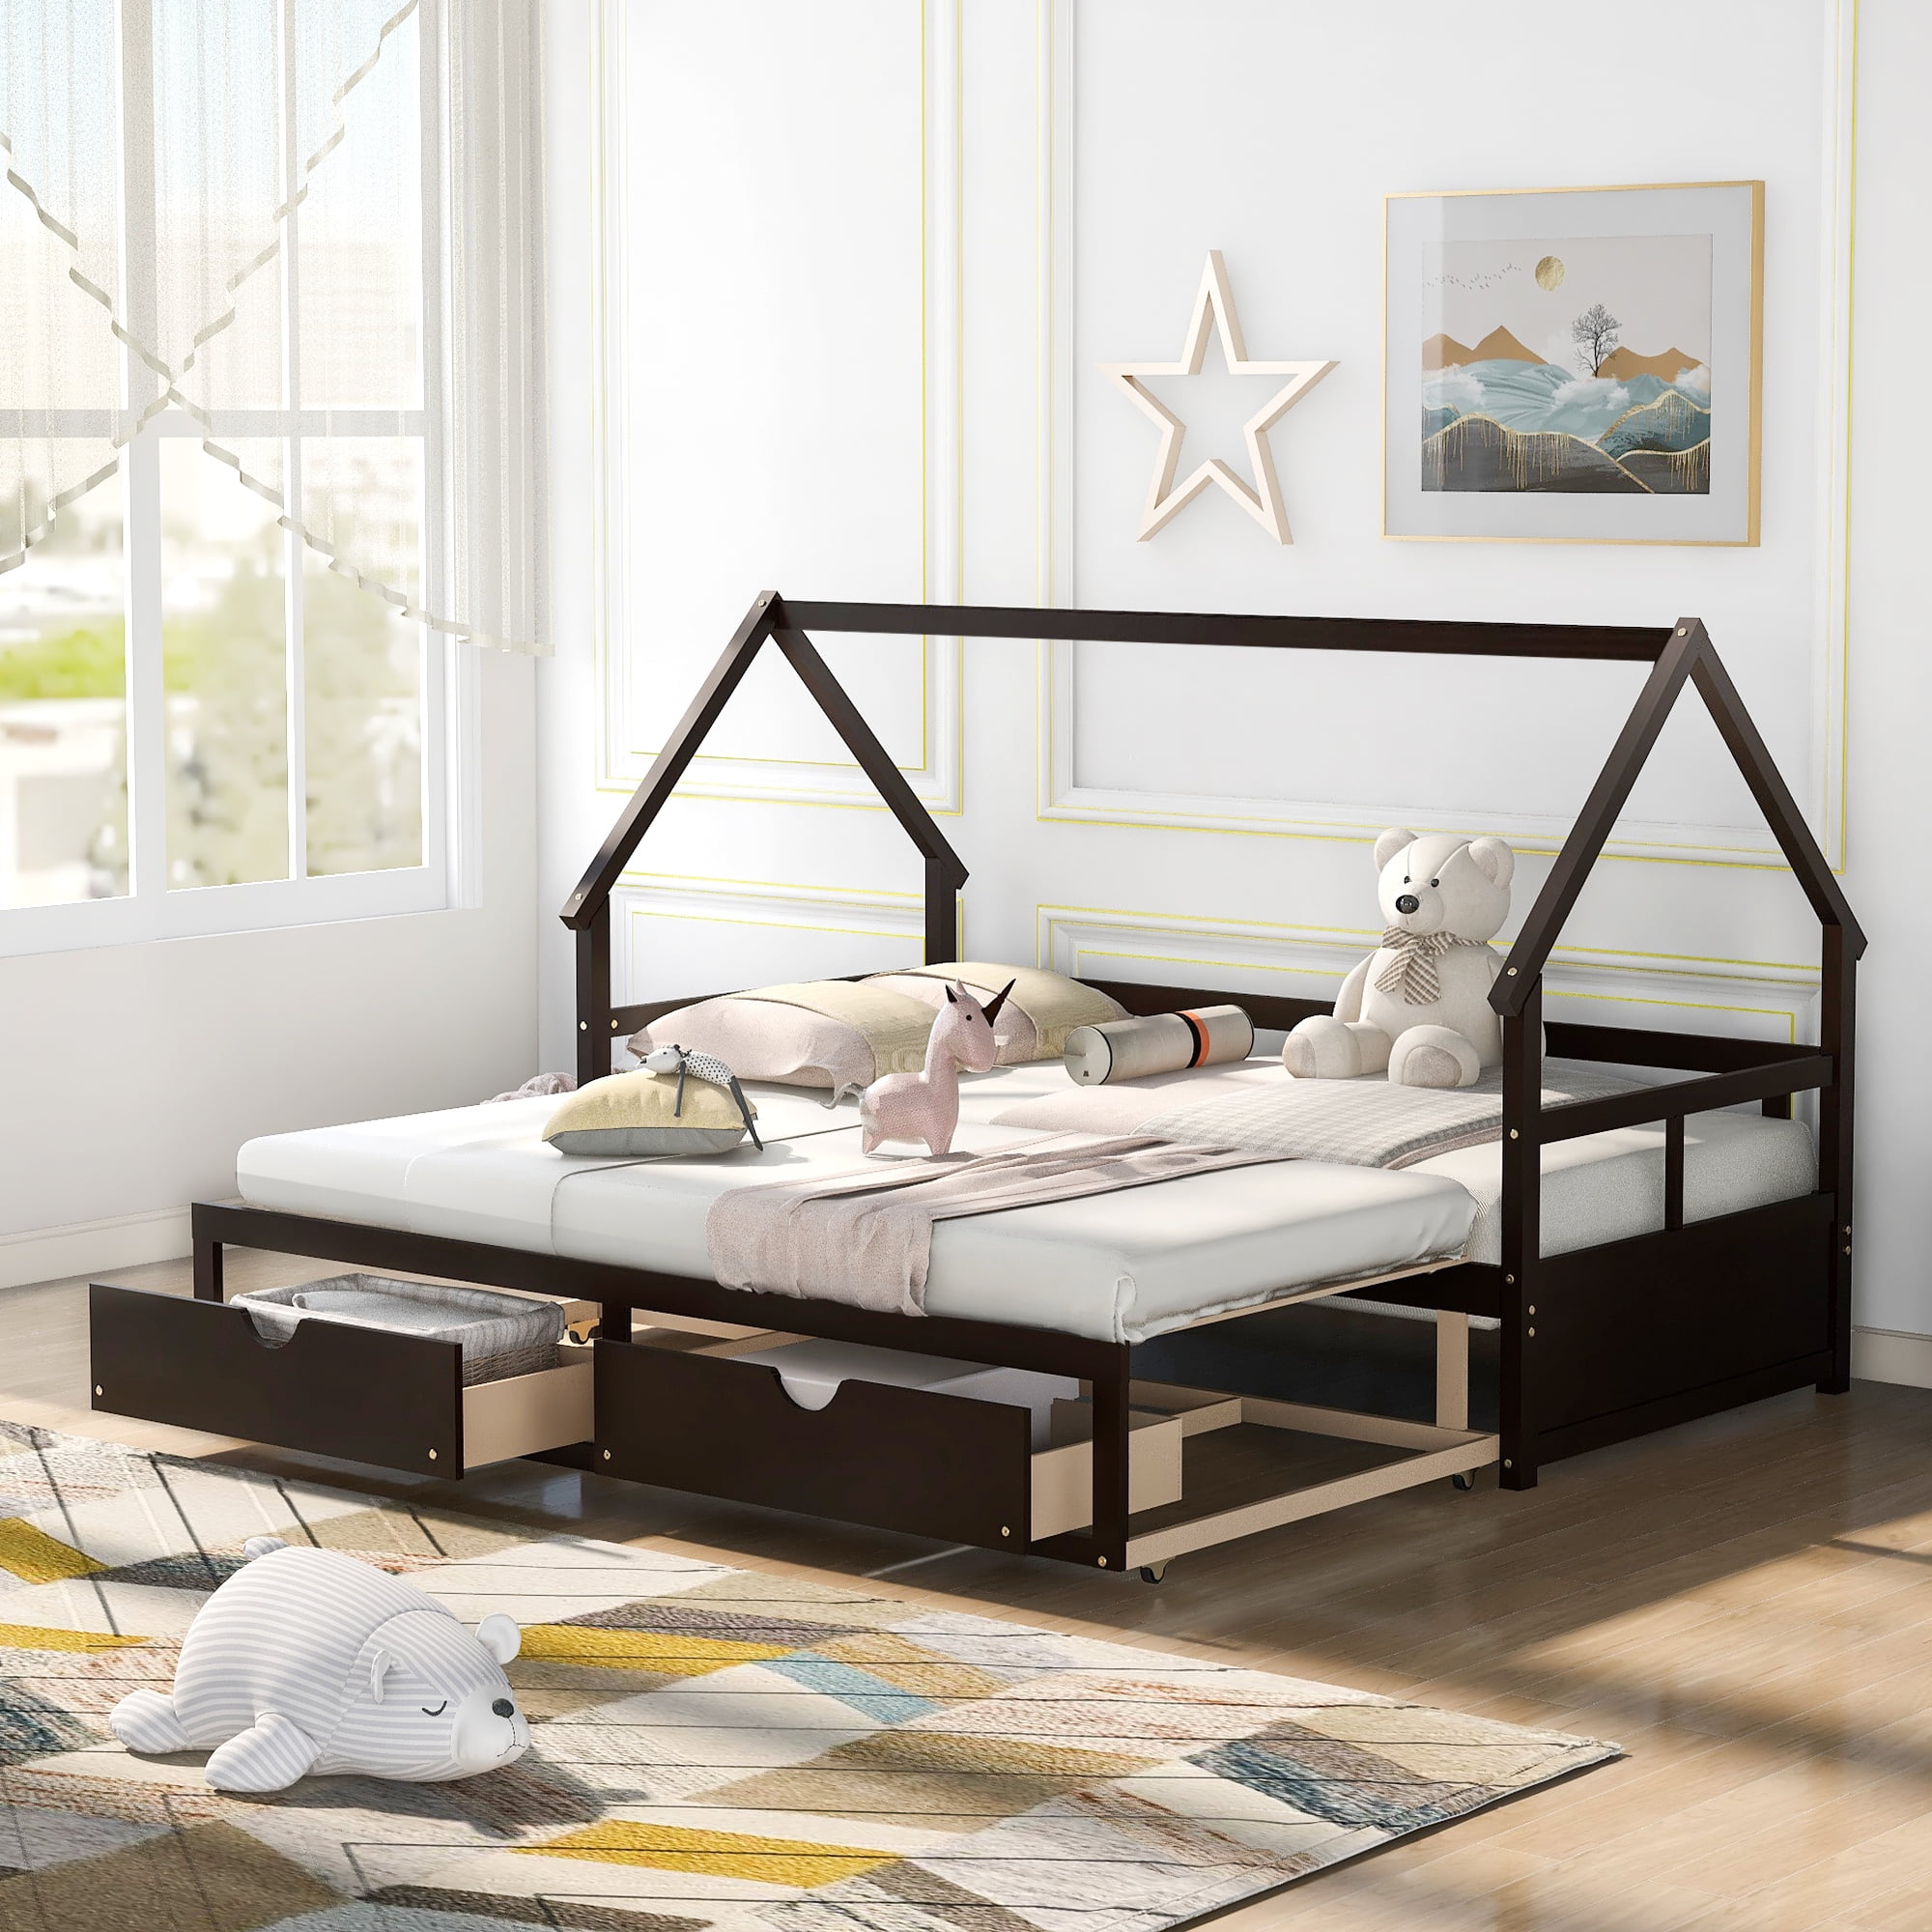 Details about   Copper Metal Daybed Frame Twin Size Bed Kids Bedroom Furniture Guest Dorm Home 